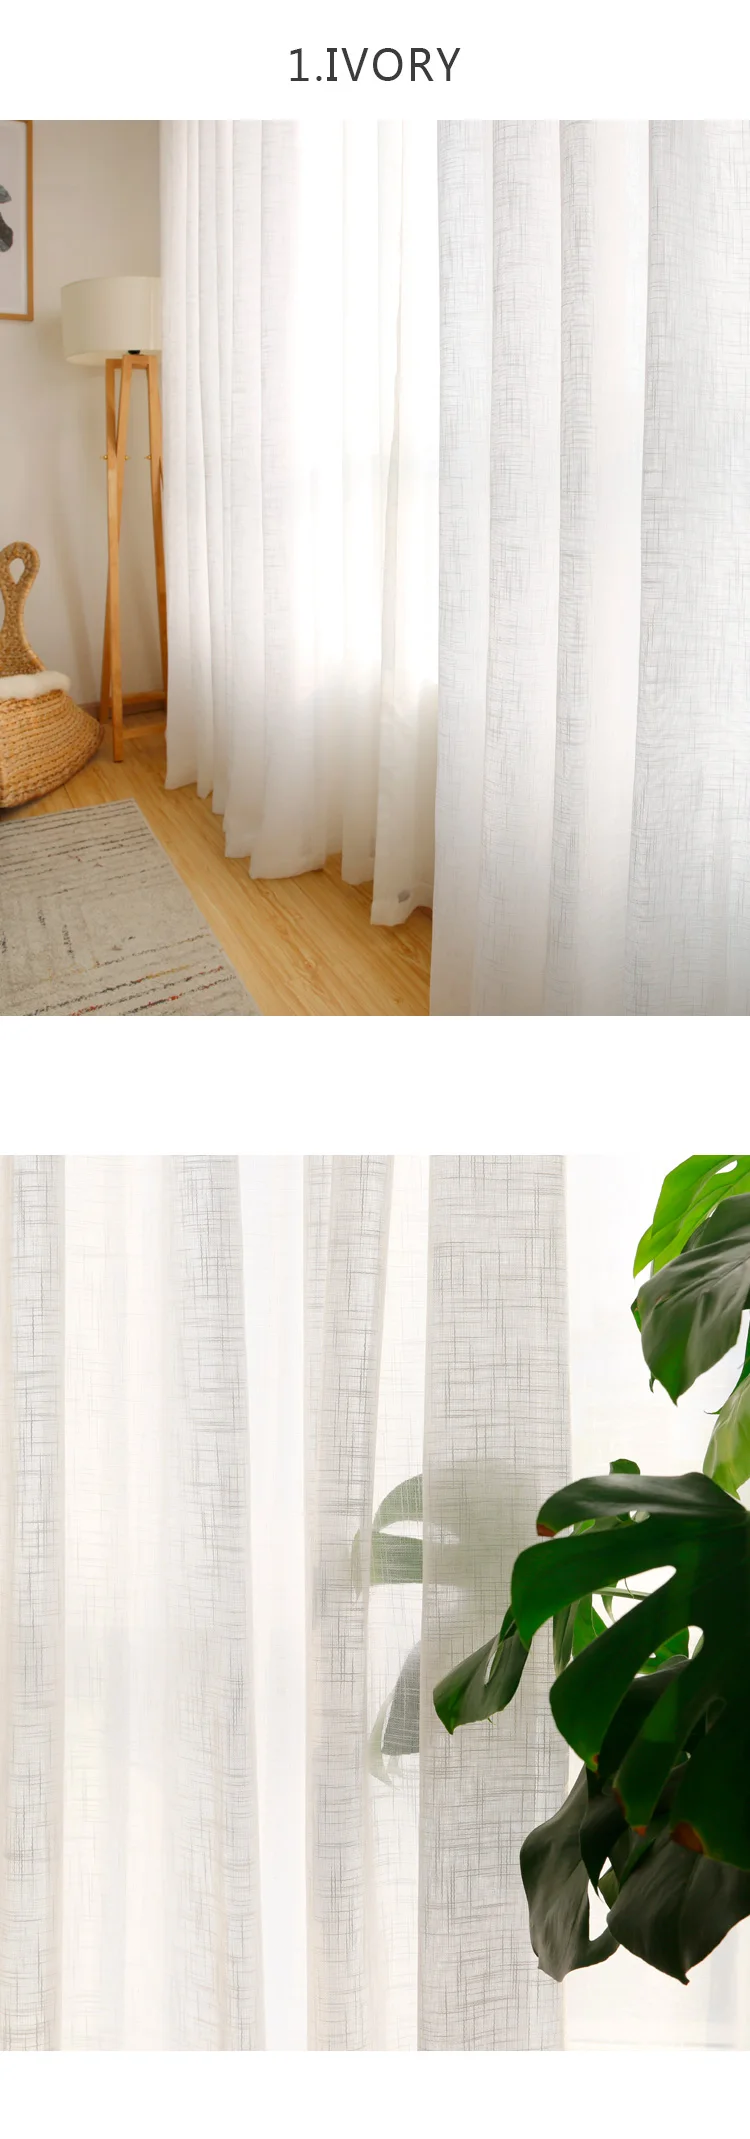 CITYINCITY TulleAmerican Curtains for Living room Soft White Voilesolid Rural Tulle Curtain for bedroom ready made curtain04